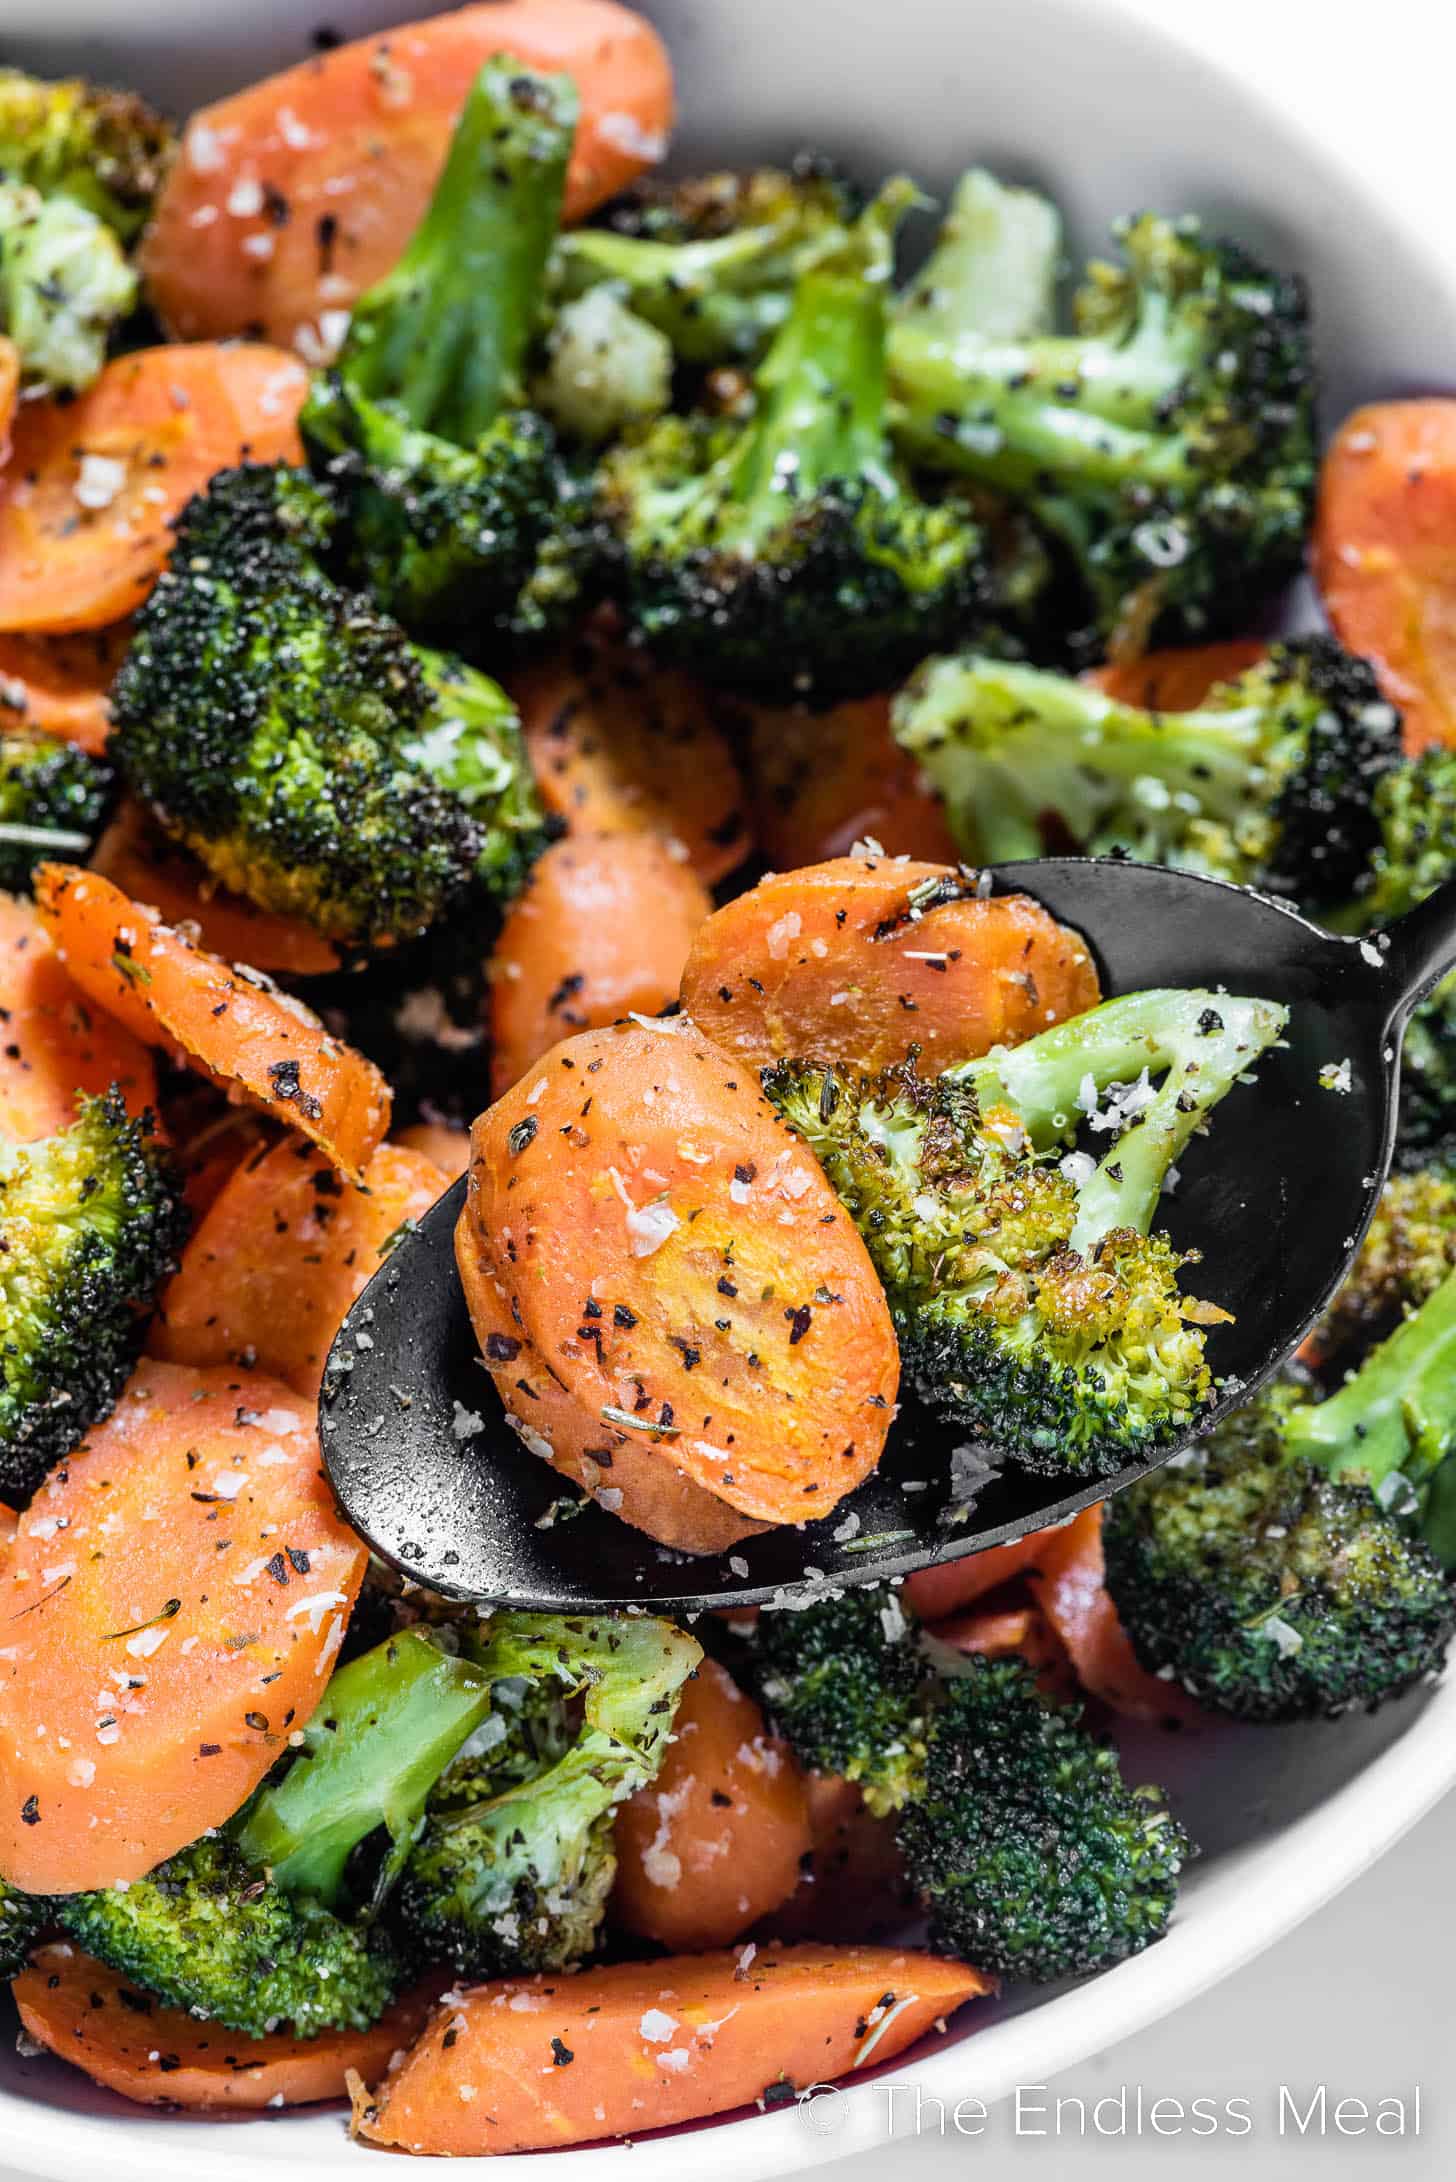 a close up of roasted broccoli and carrots.